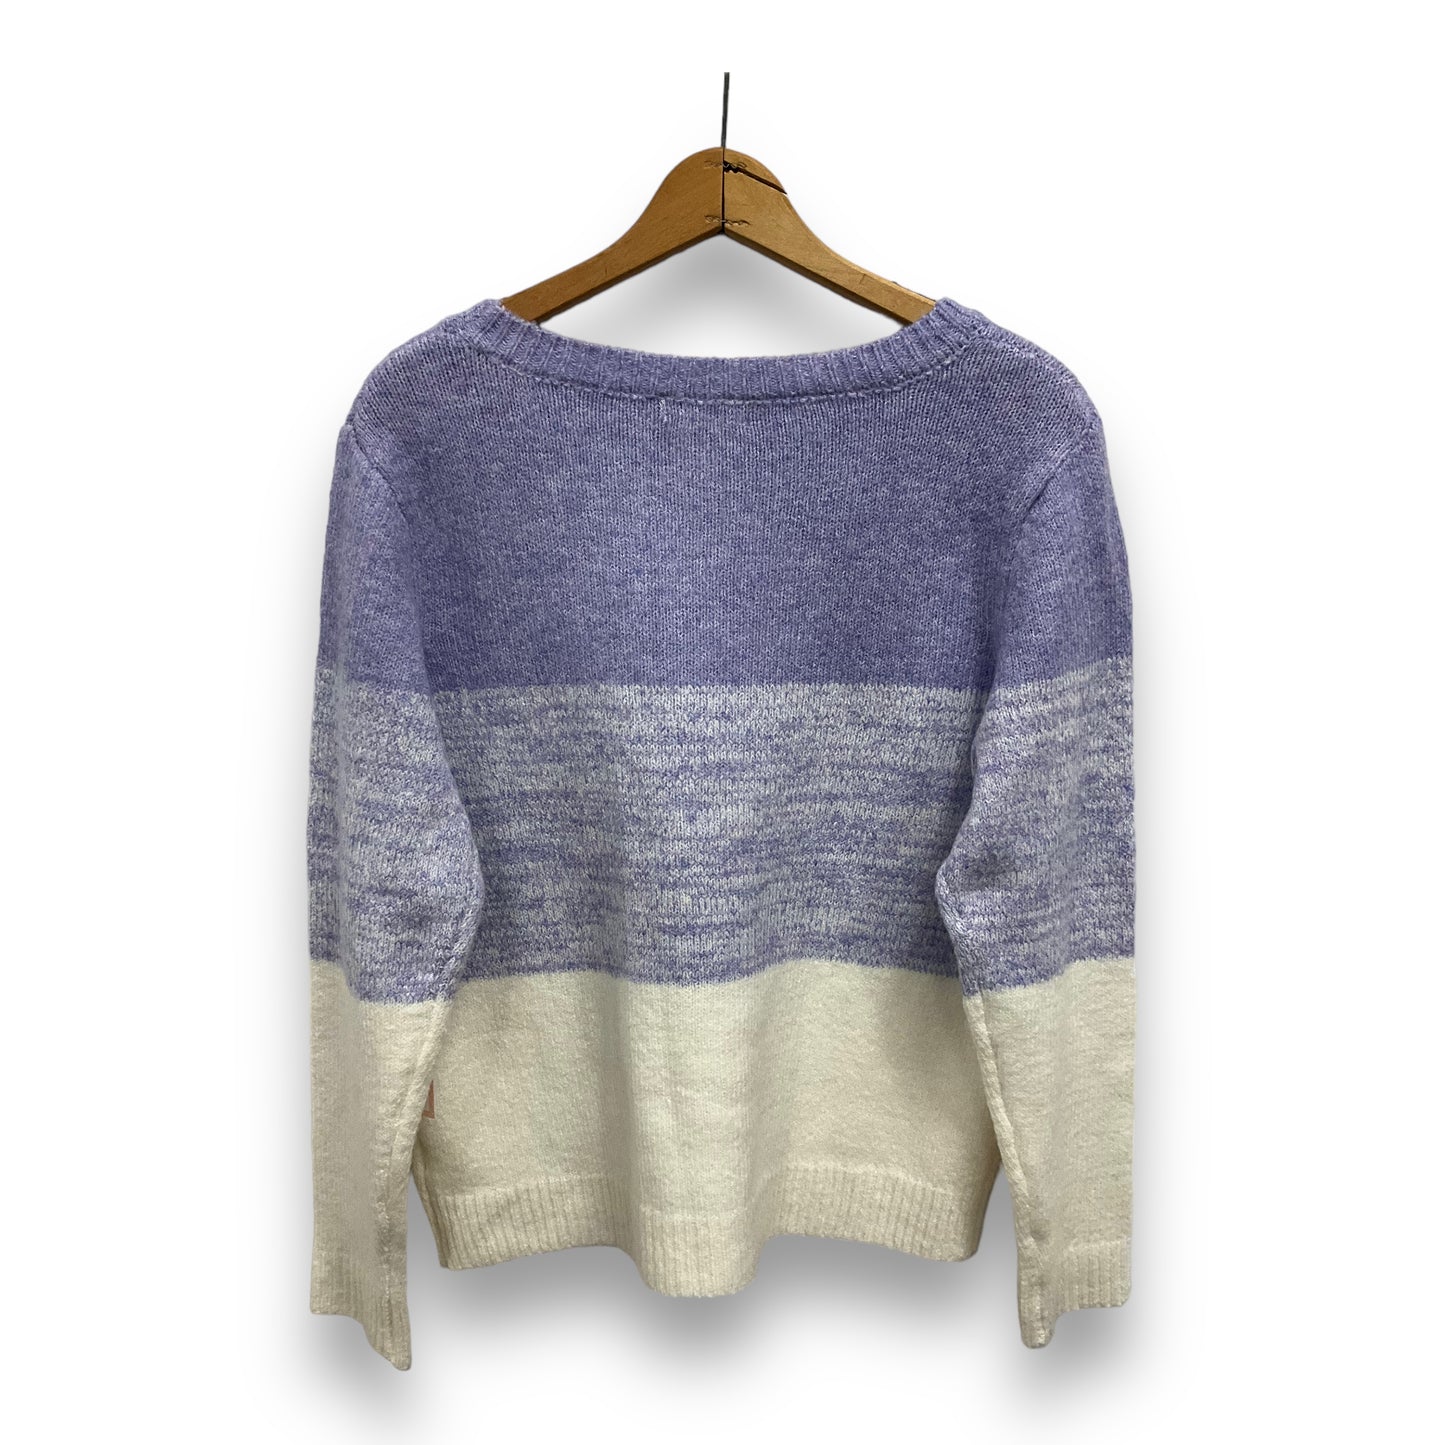 Sweater By Cupcakes And Cashmere  Size: L